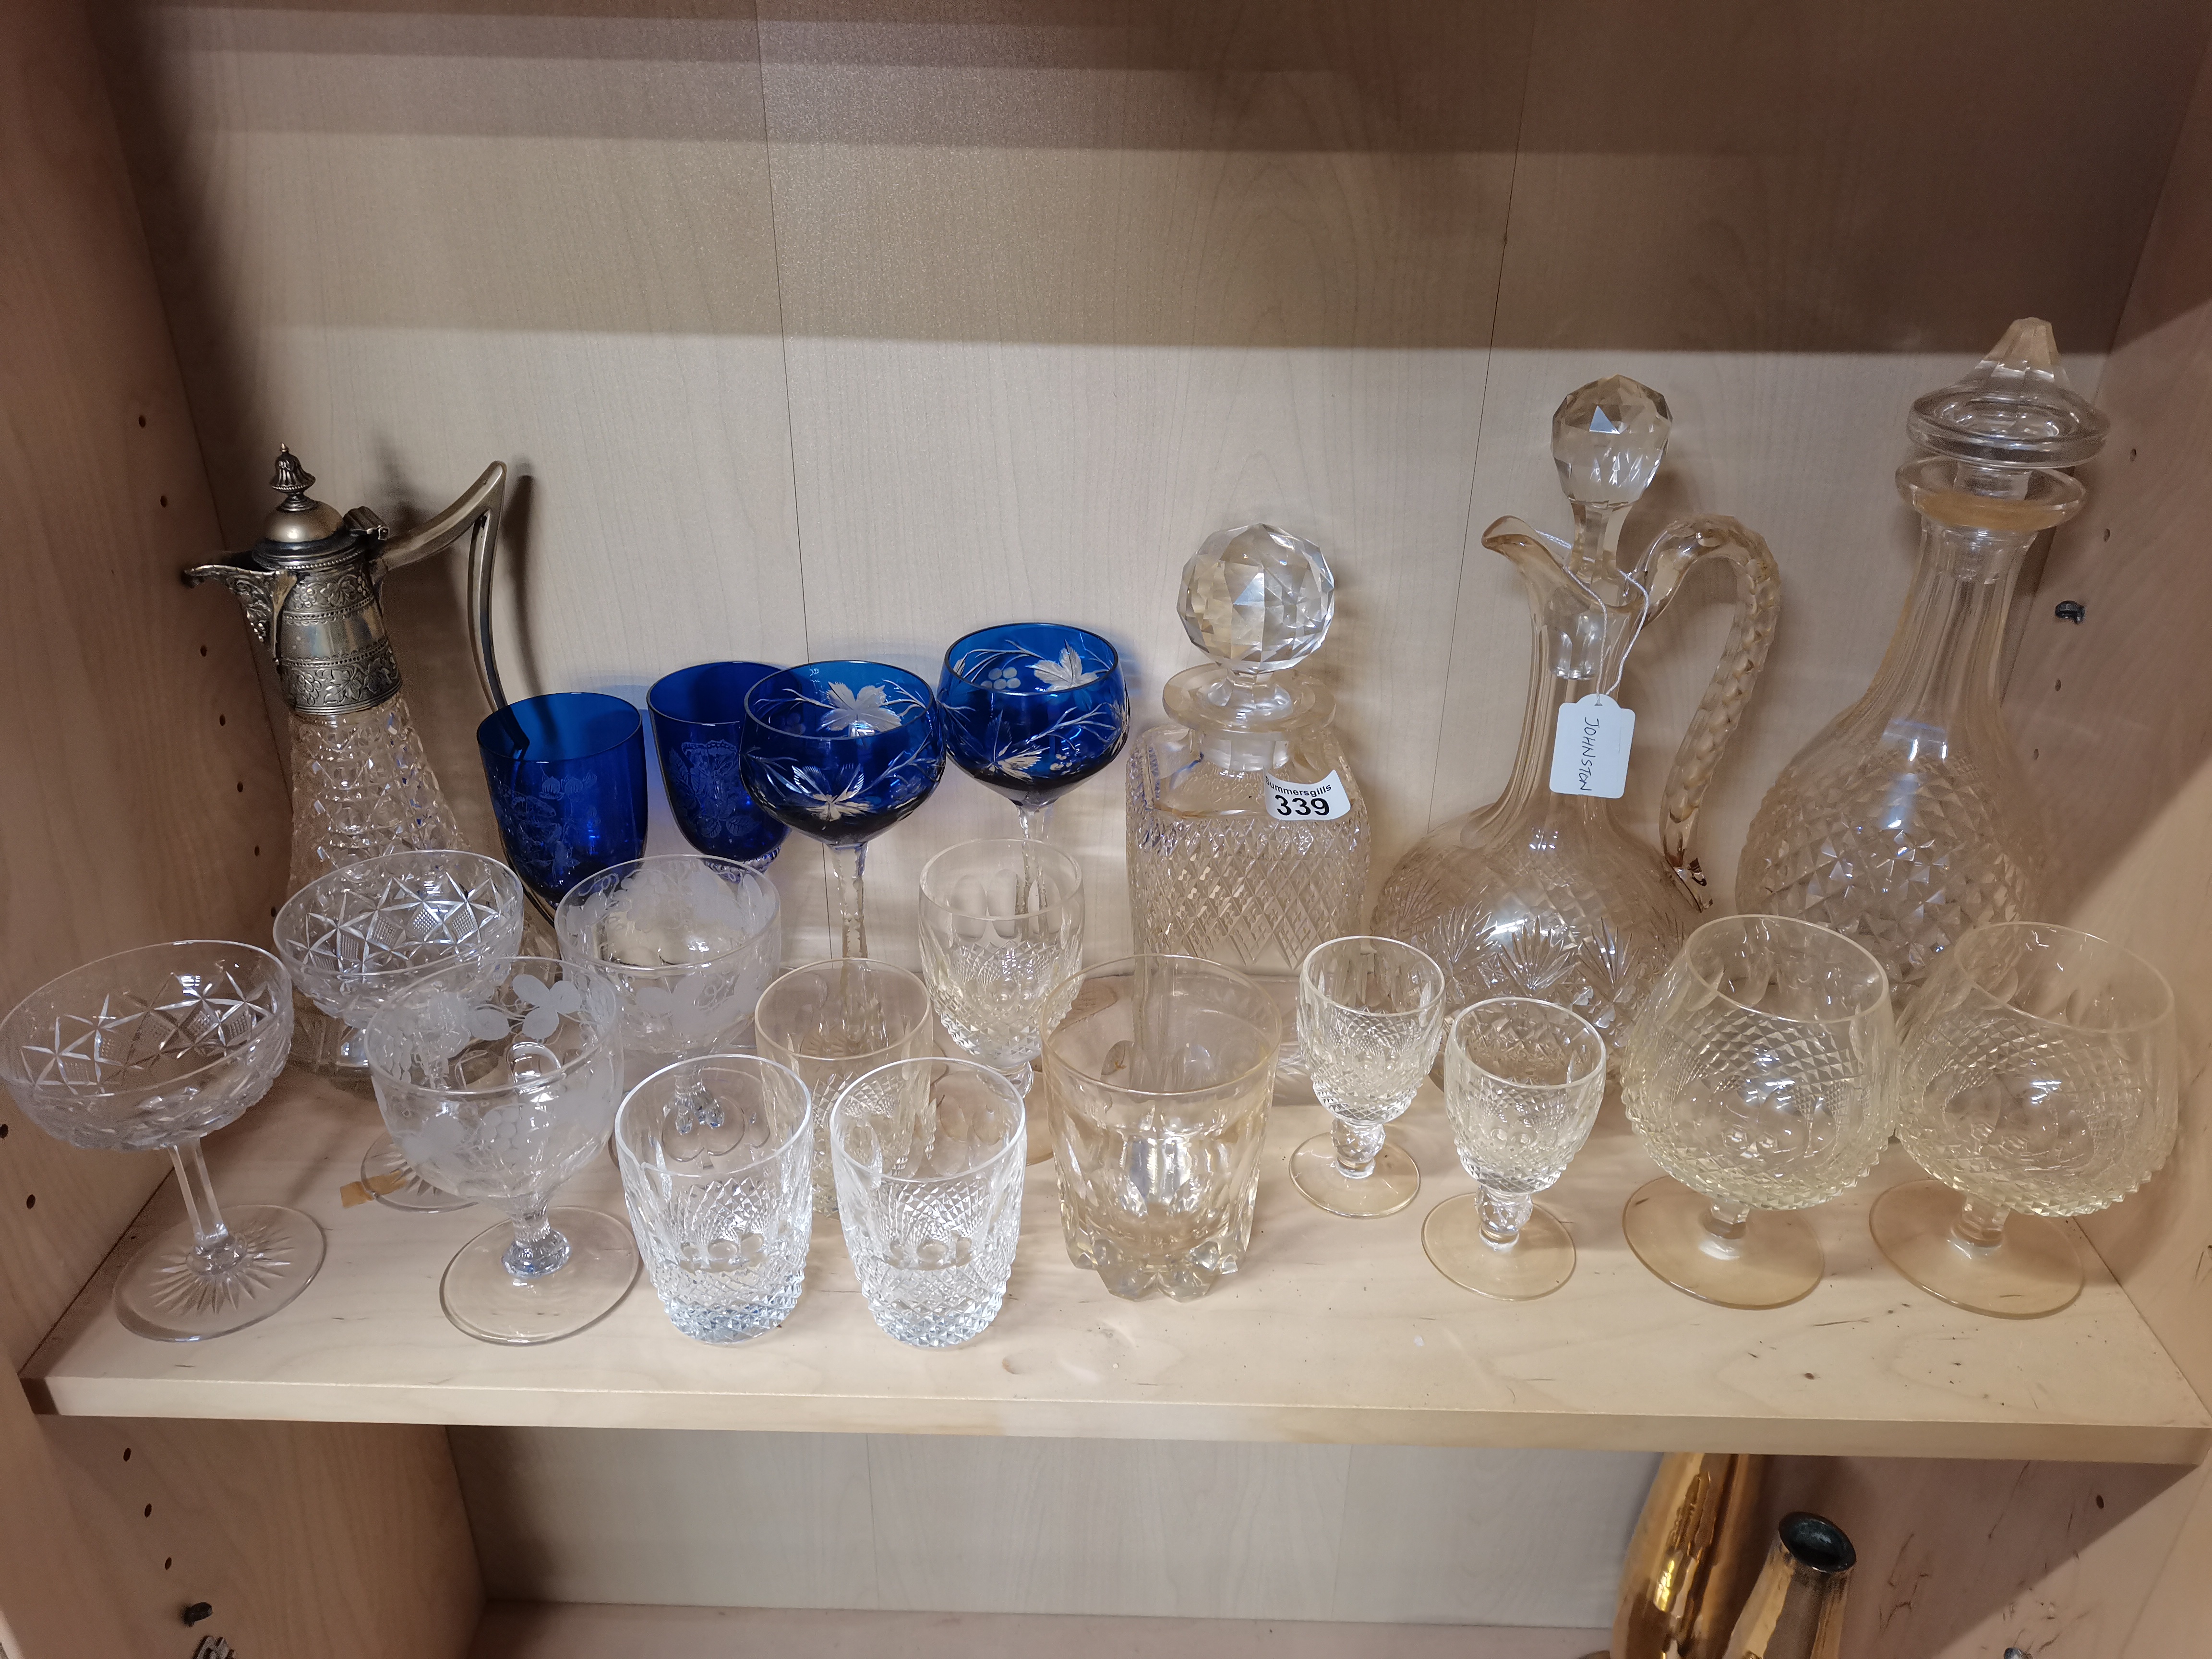 21 pieces of Glassware to include two Claret Jugs, 2 Decanters and 17 glasses